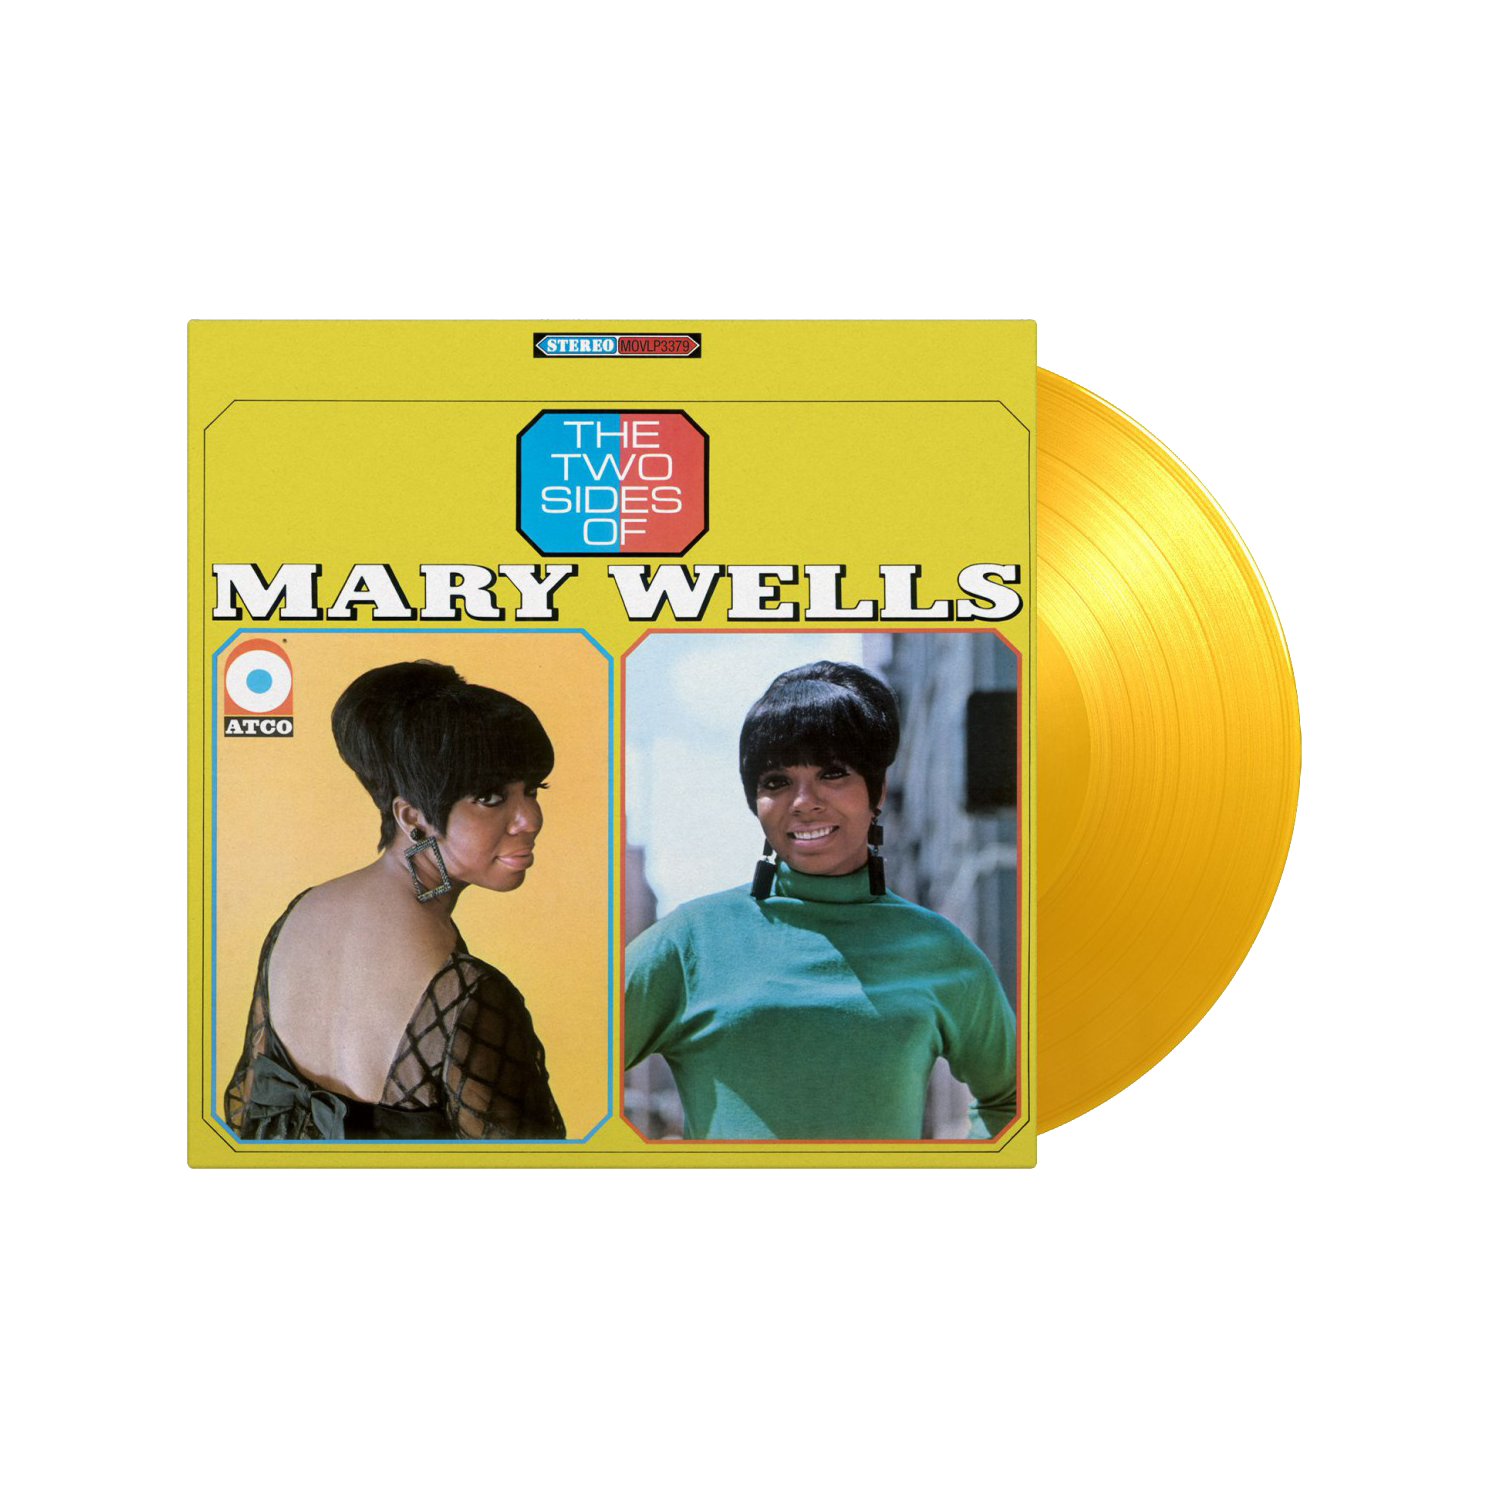 Mary Wells - The Two Sides of Mary Wells: Limited Translucent Yellow Vinyl LP